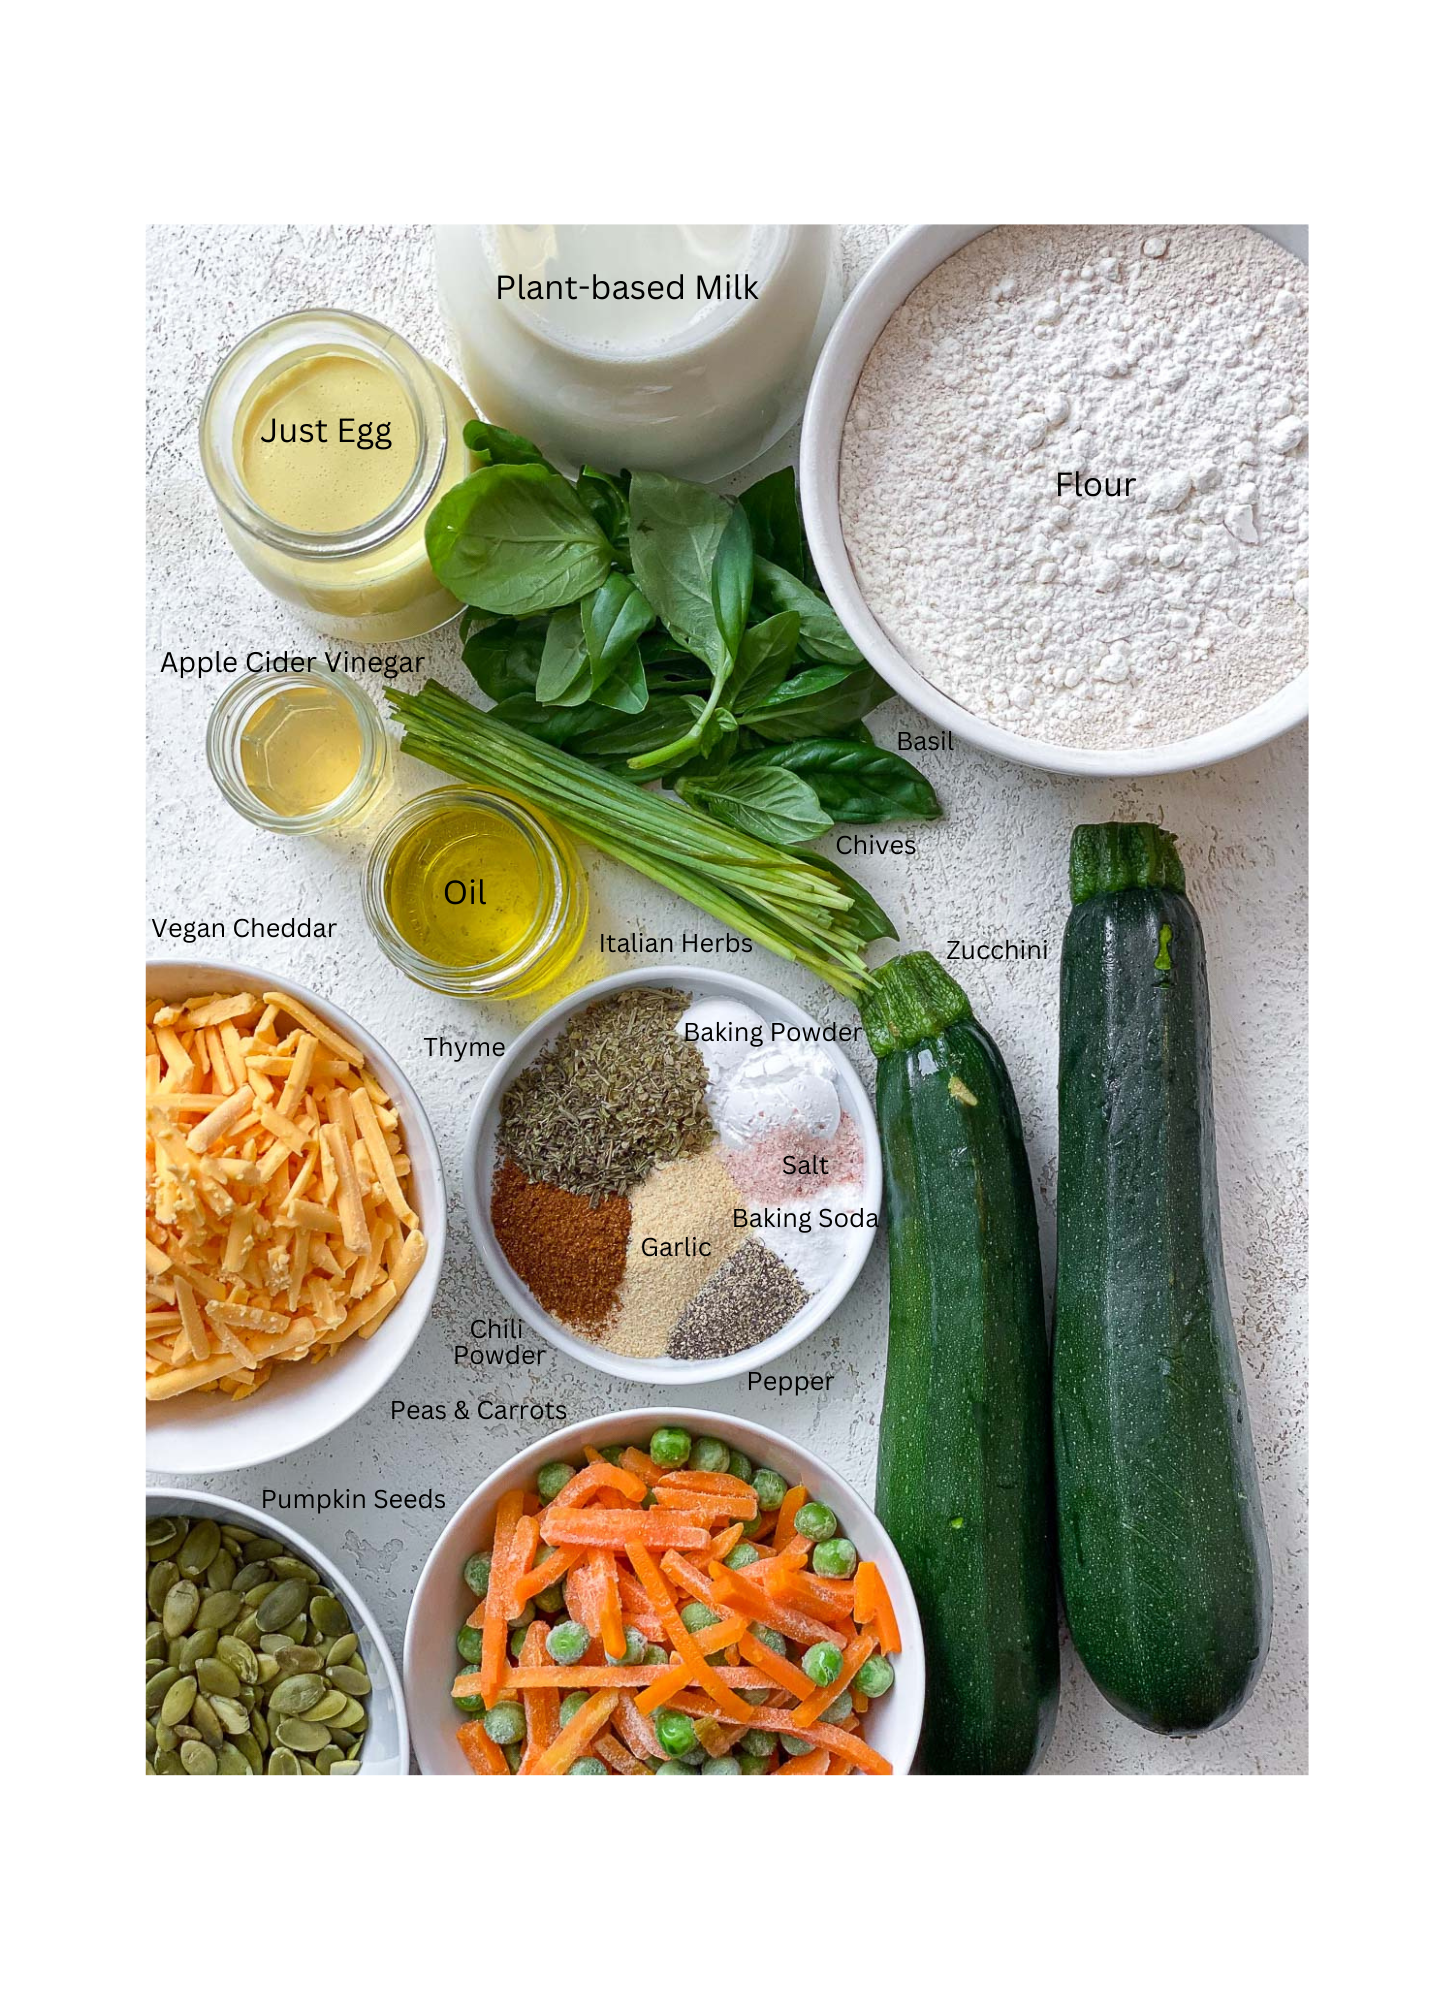 ingredients for Healthy Veggie Muffins measured out against a white surface